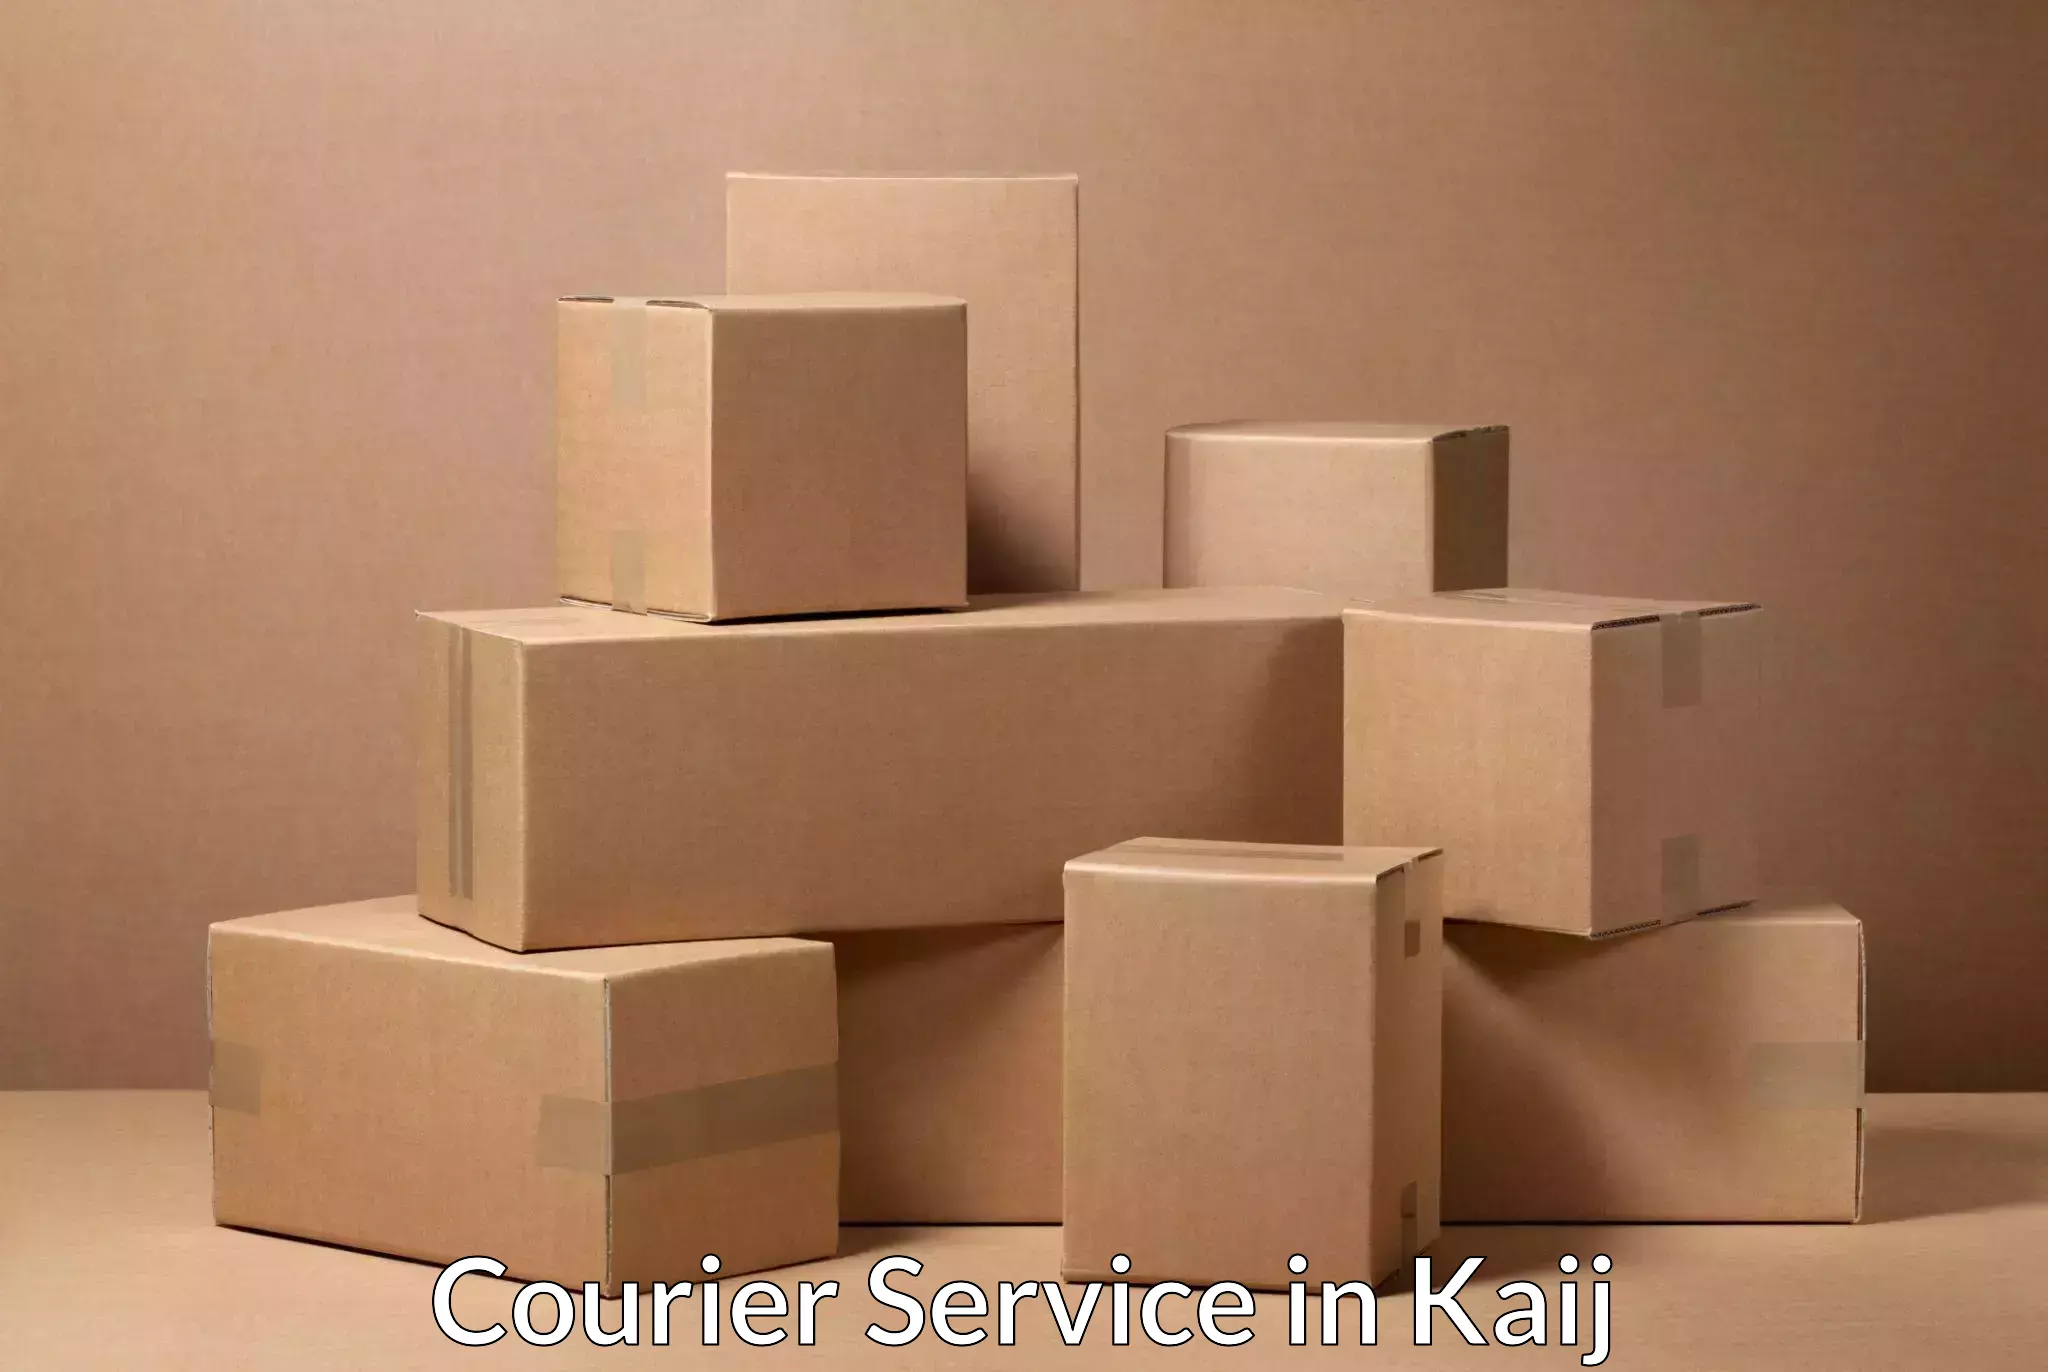 Tailored delivery services in Kaij